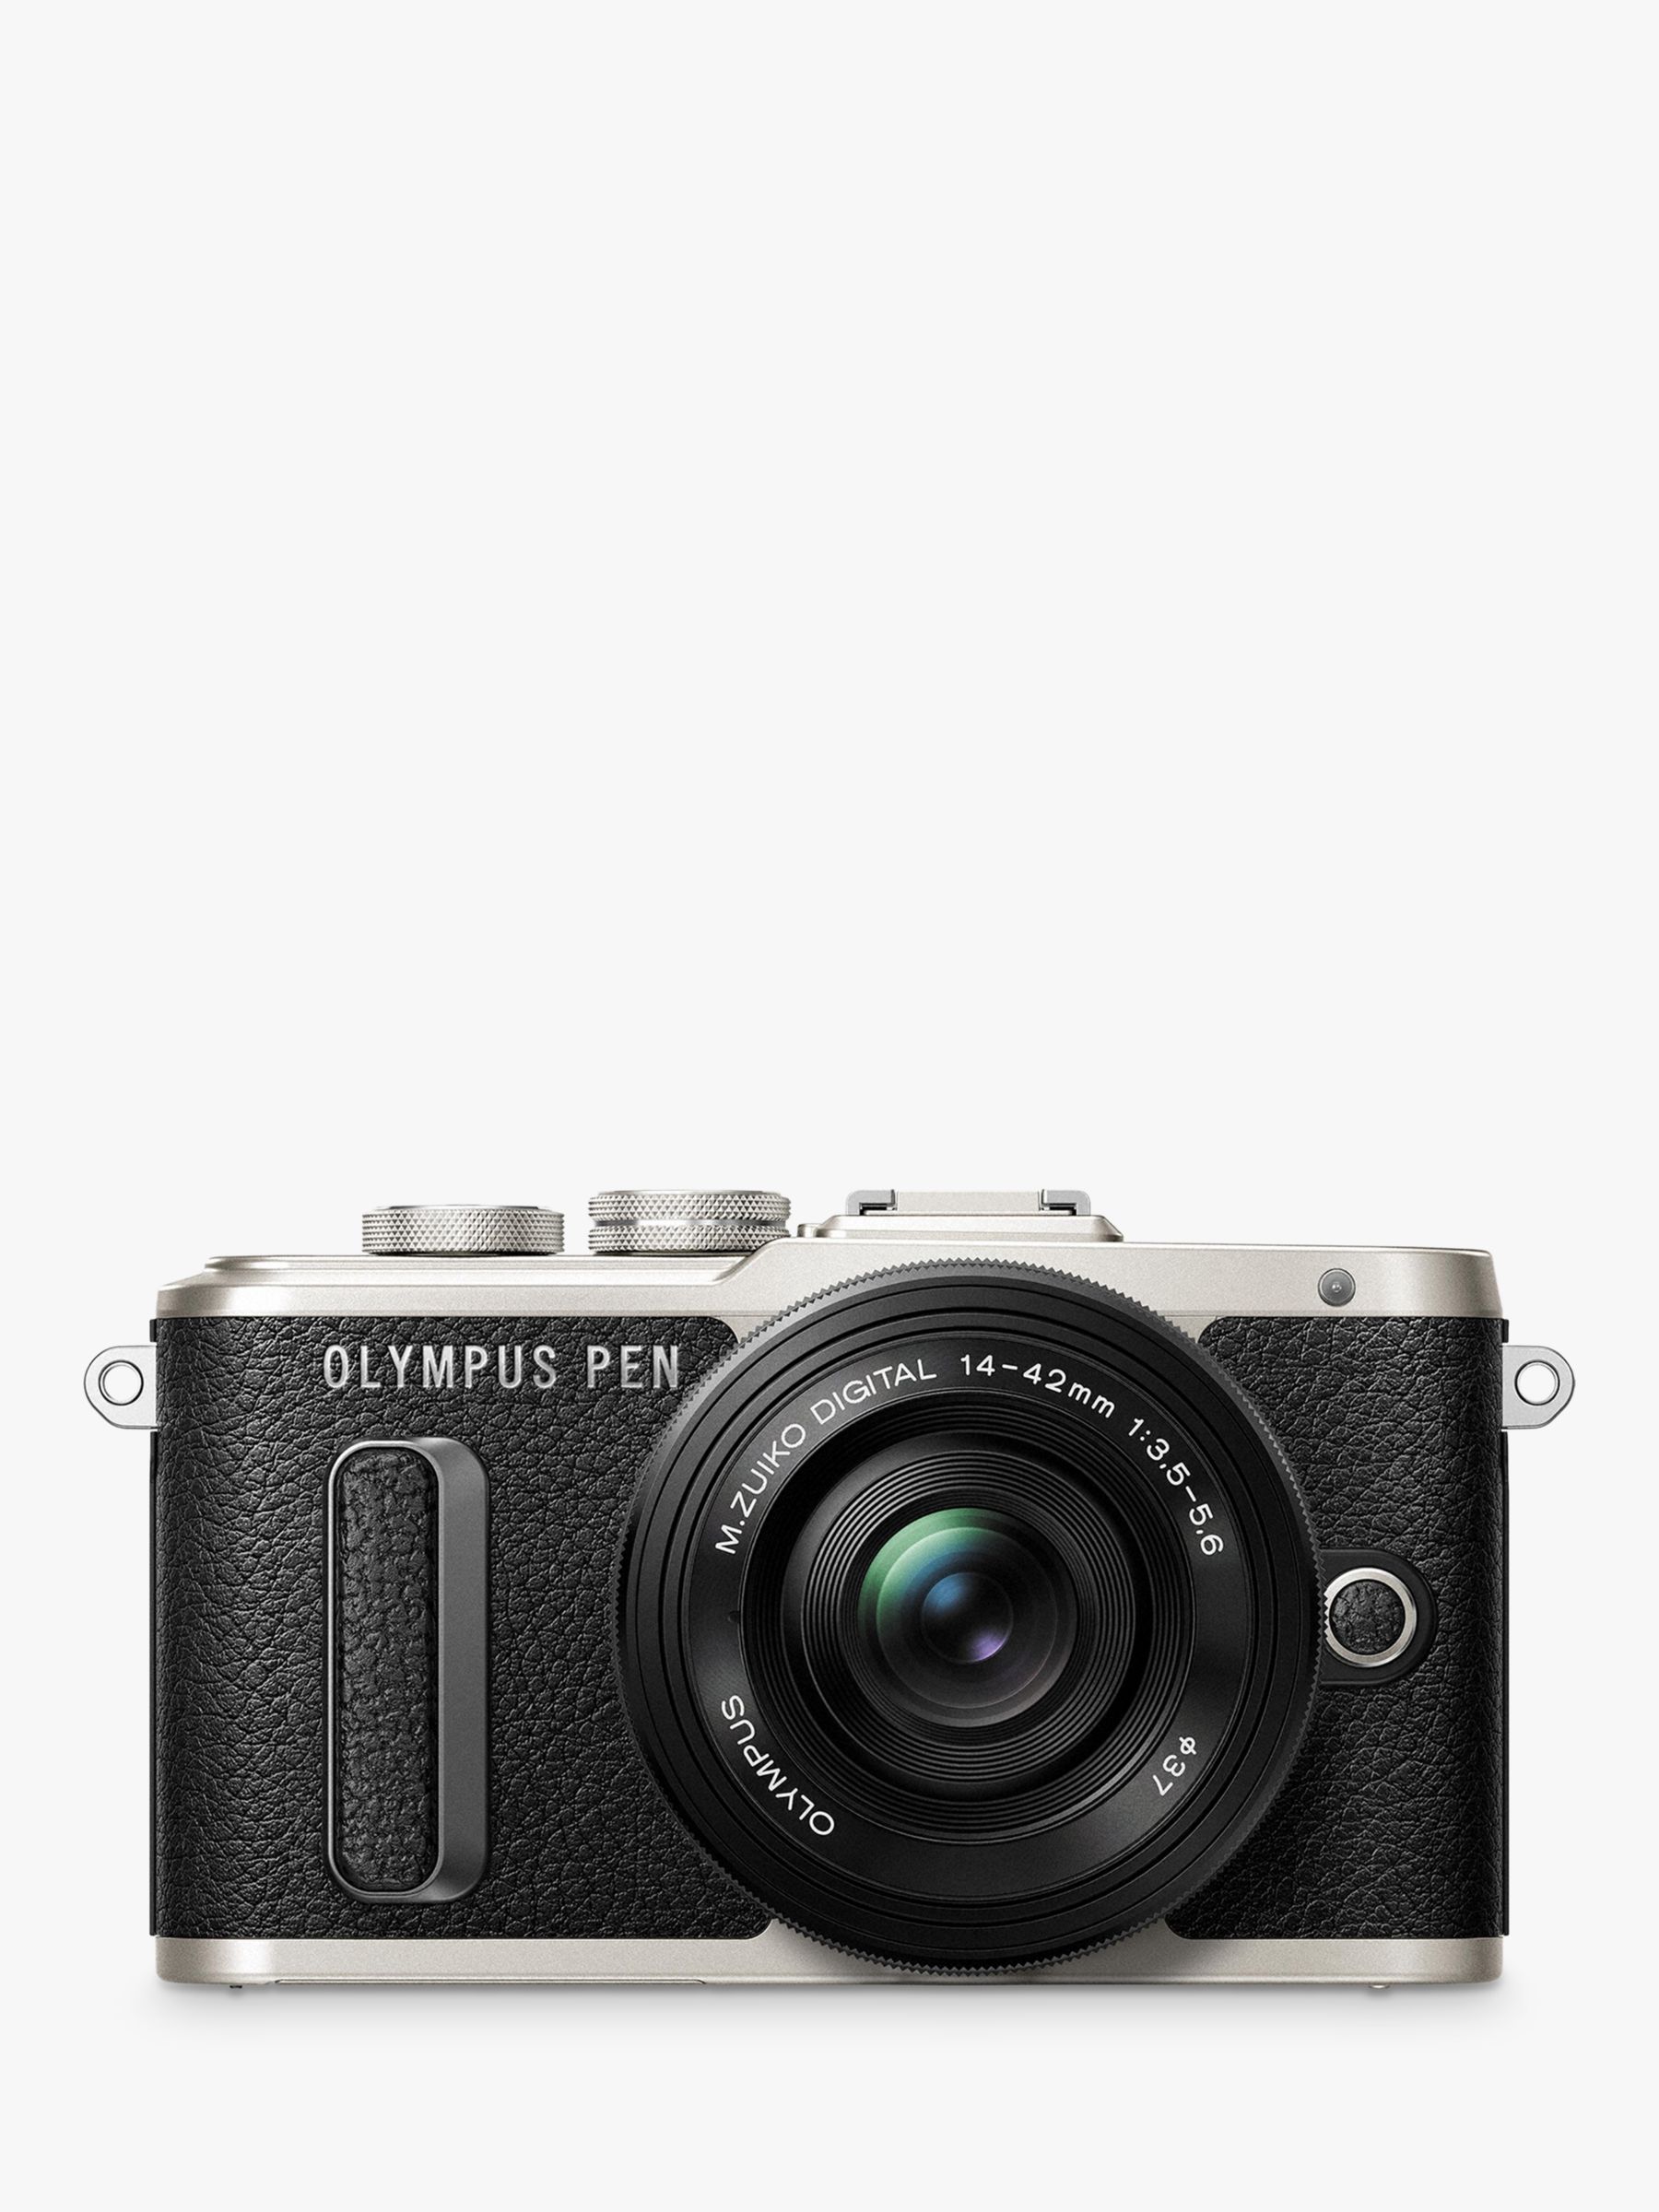 Olympus PEN E-PL8 Compact System Camera with 14-42mm EZ Lens, HD 1080p, 16.1MP, Wi-Fi, 3 LCD Touch Screen